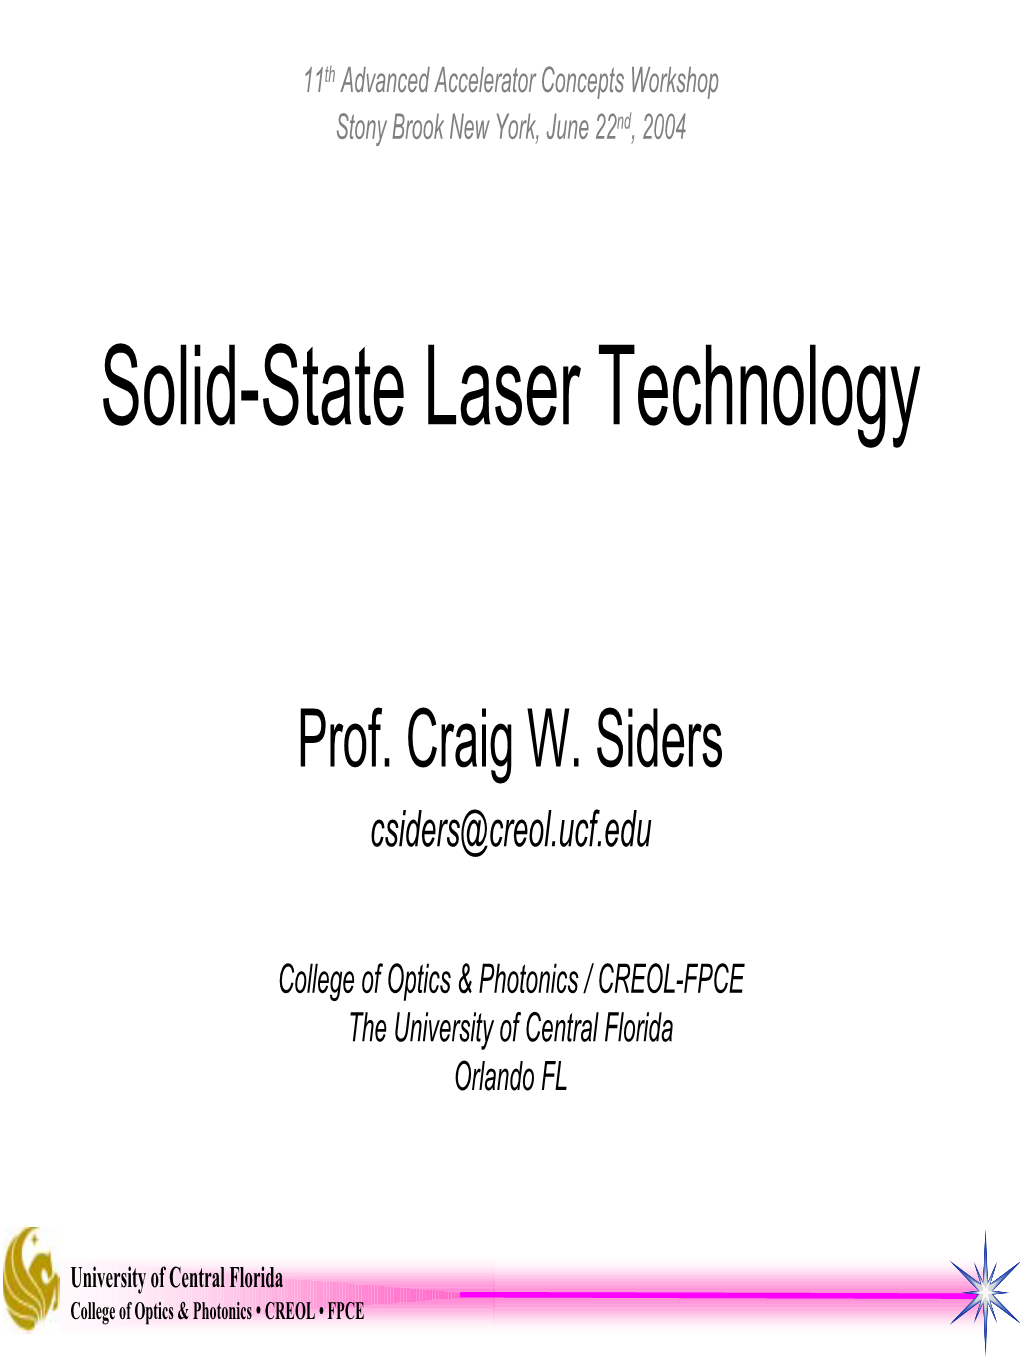 Solid-State Laser Technology